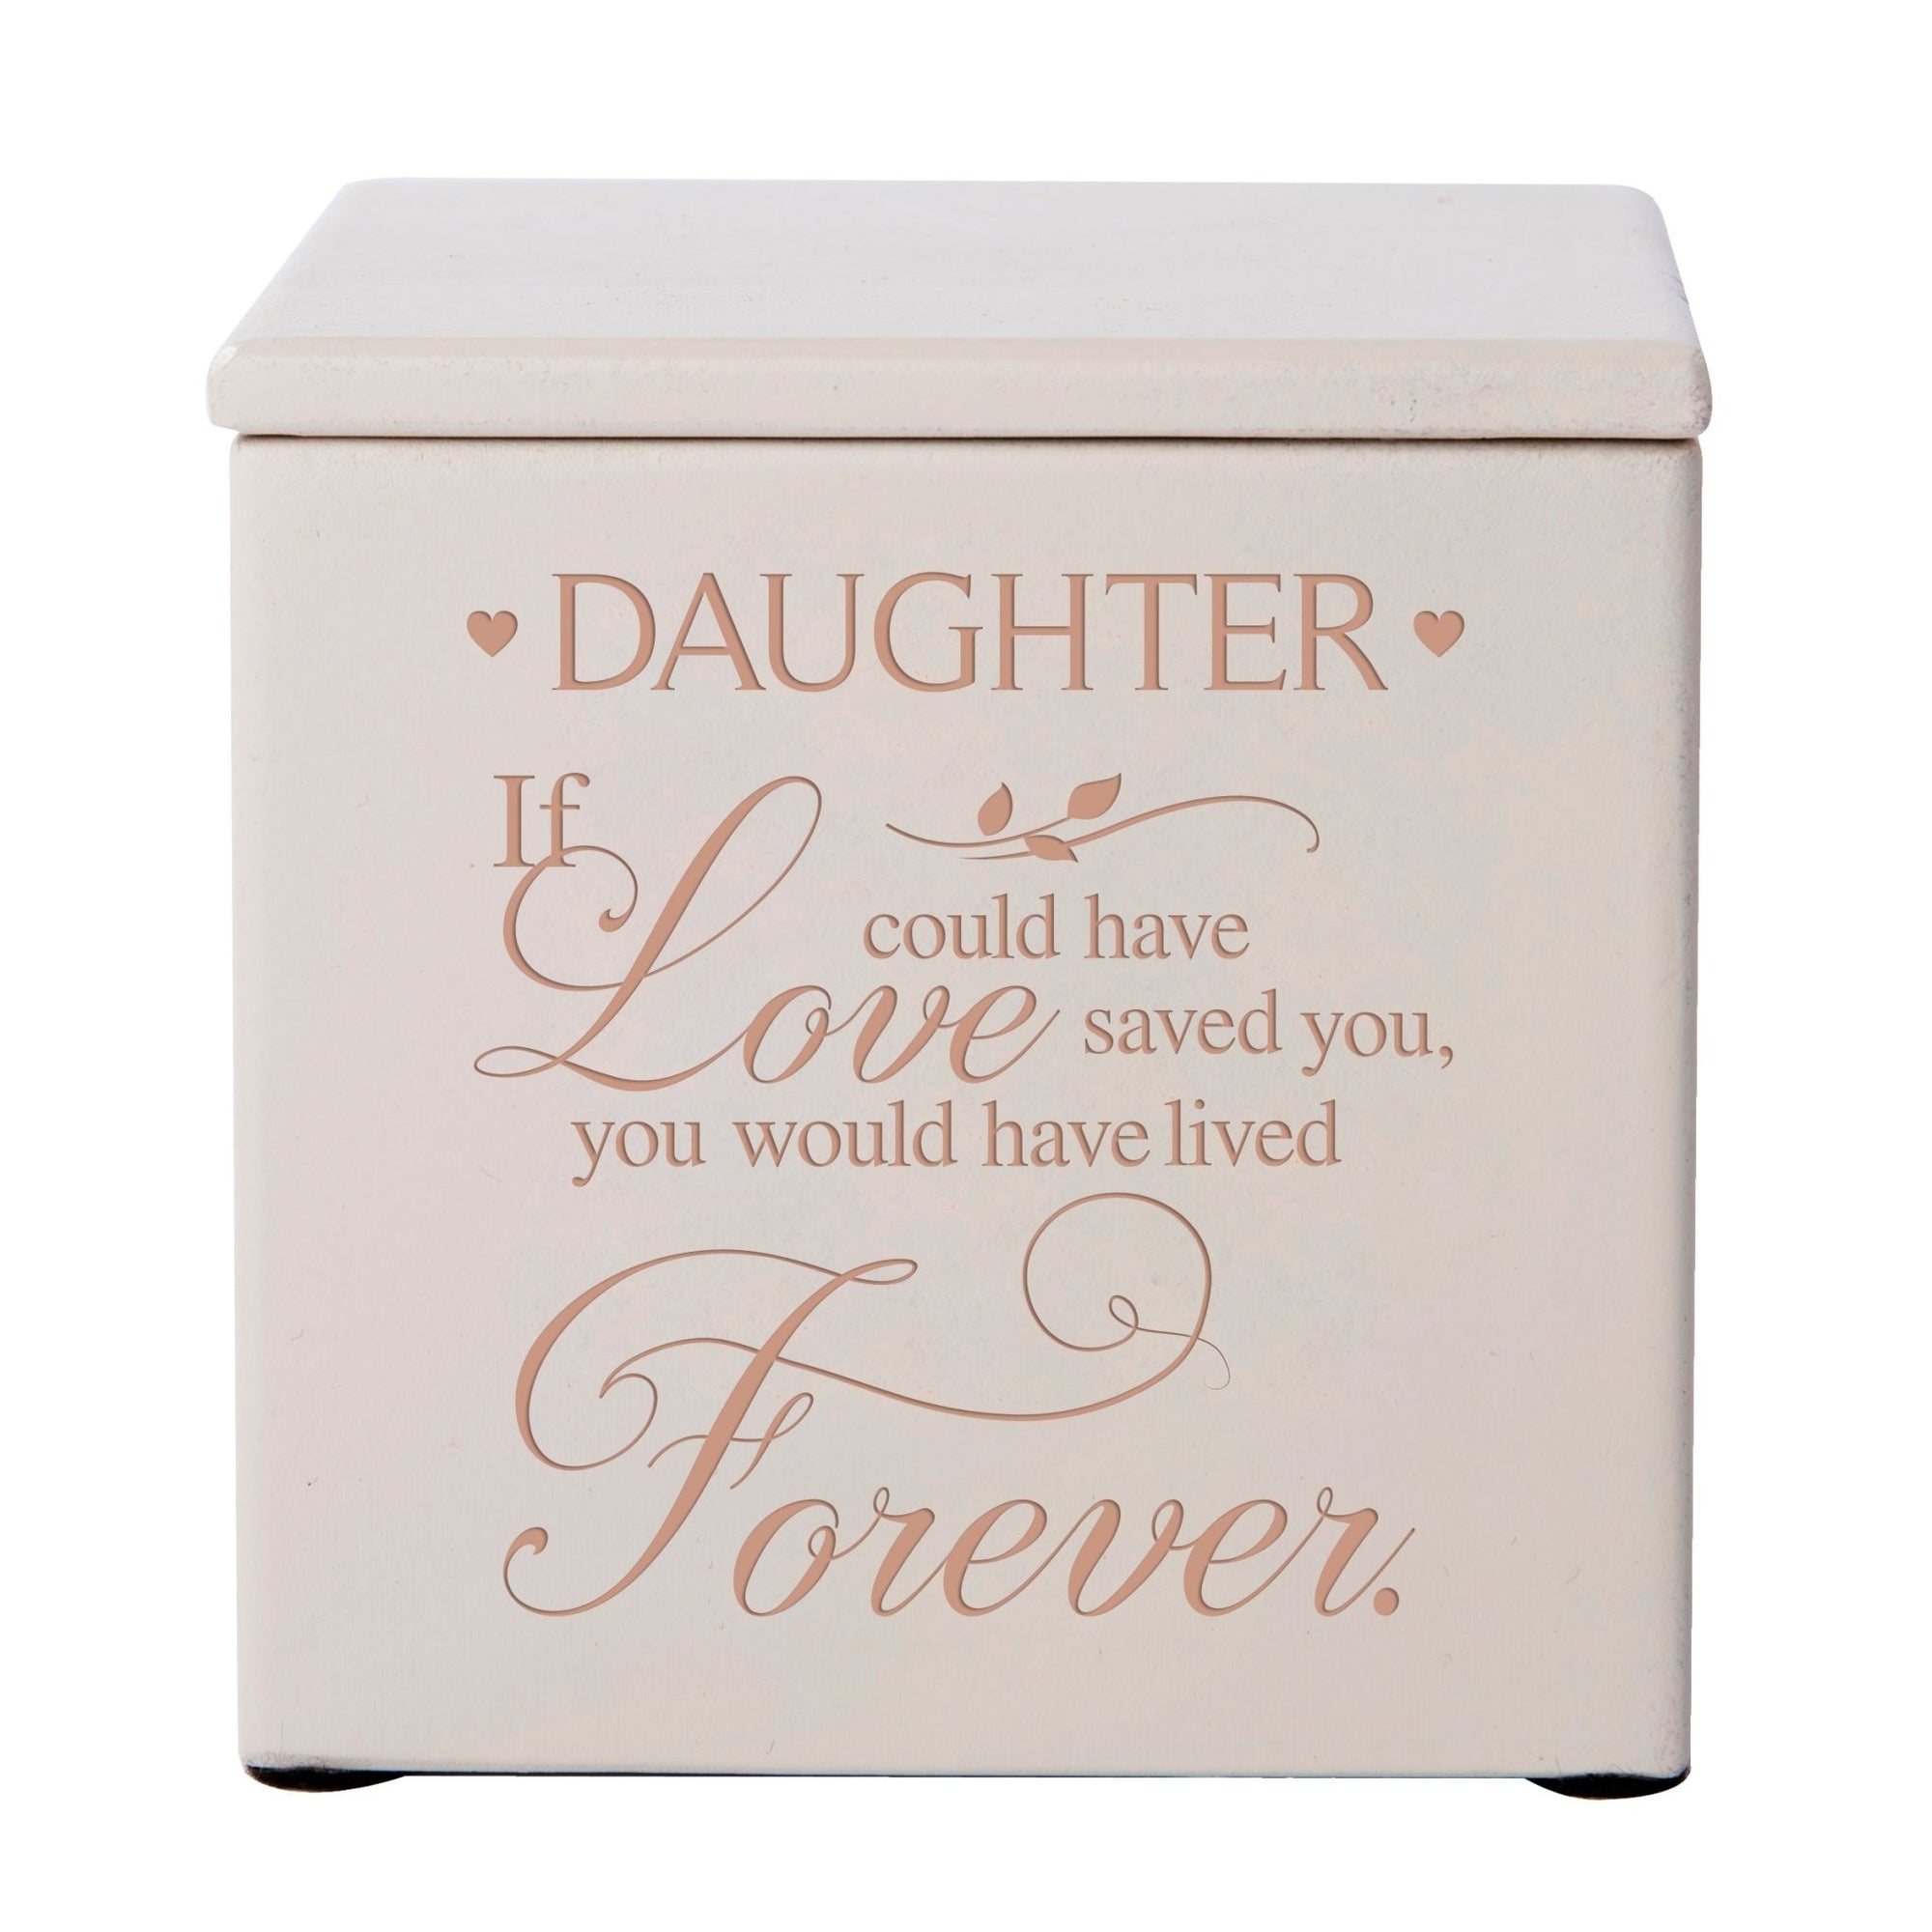 Modern Inspirational Wooden Cremation Urn Box 4.5x4.5in Holds 49 Cu Inches Of Human Ashes (If love could have saved Daughter) Funeral and Commemorative Keepsake - LifeSong Milestones